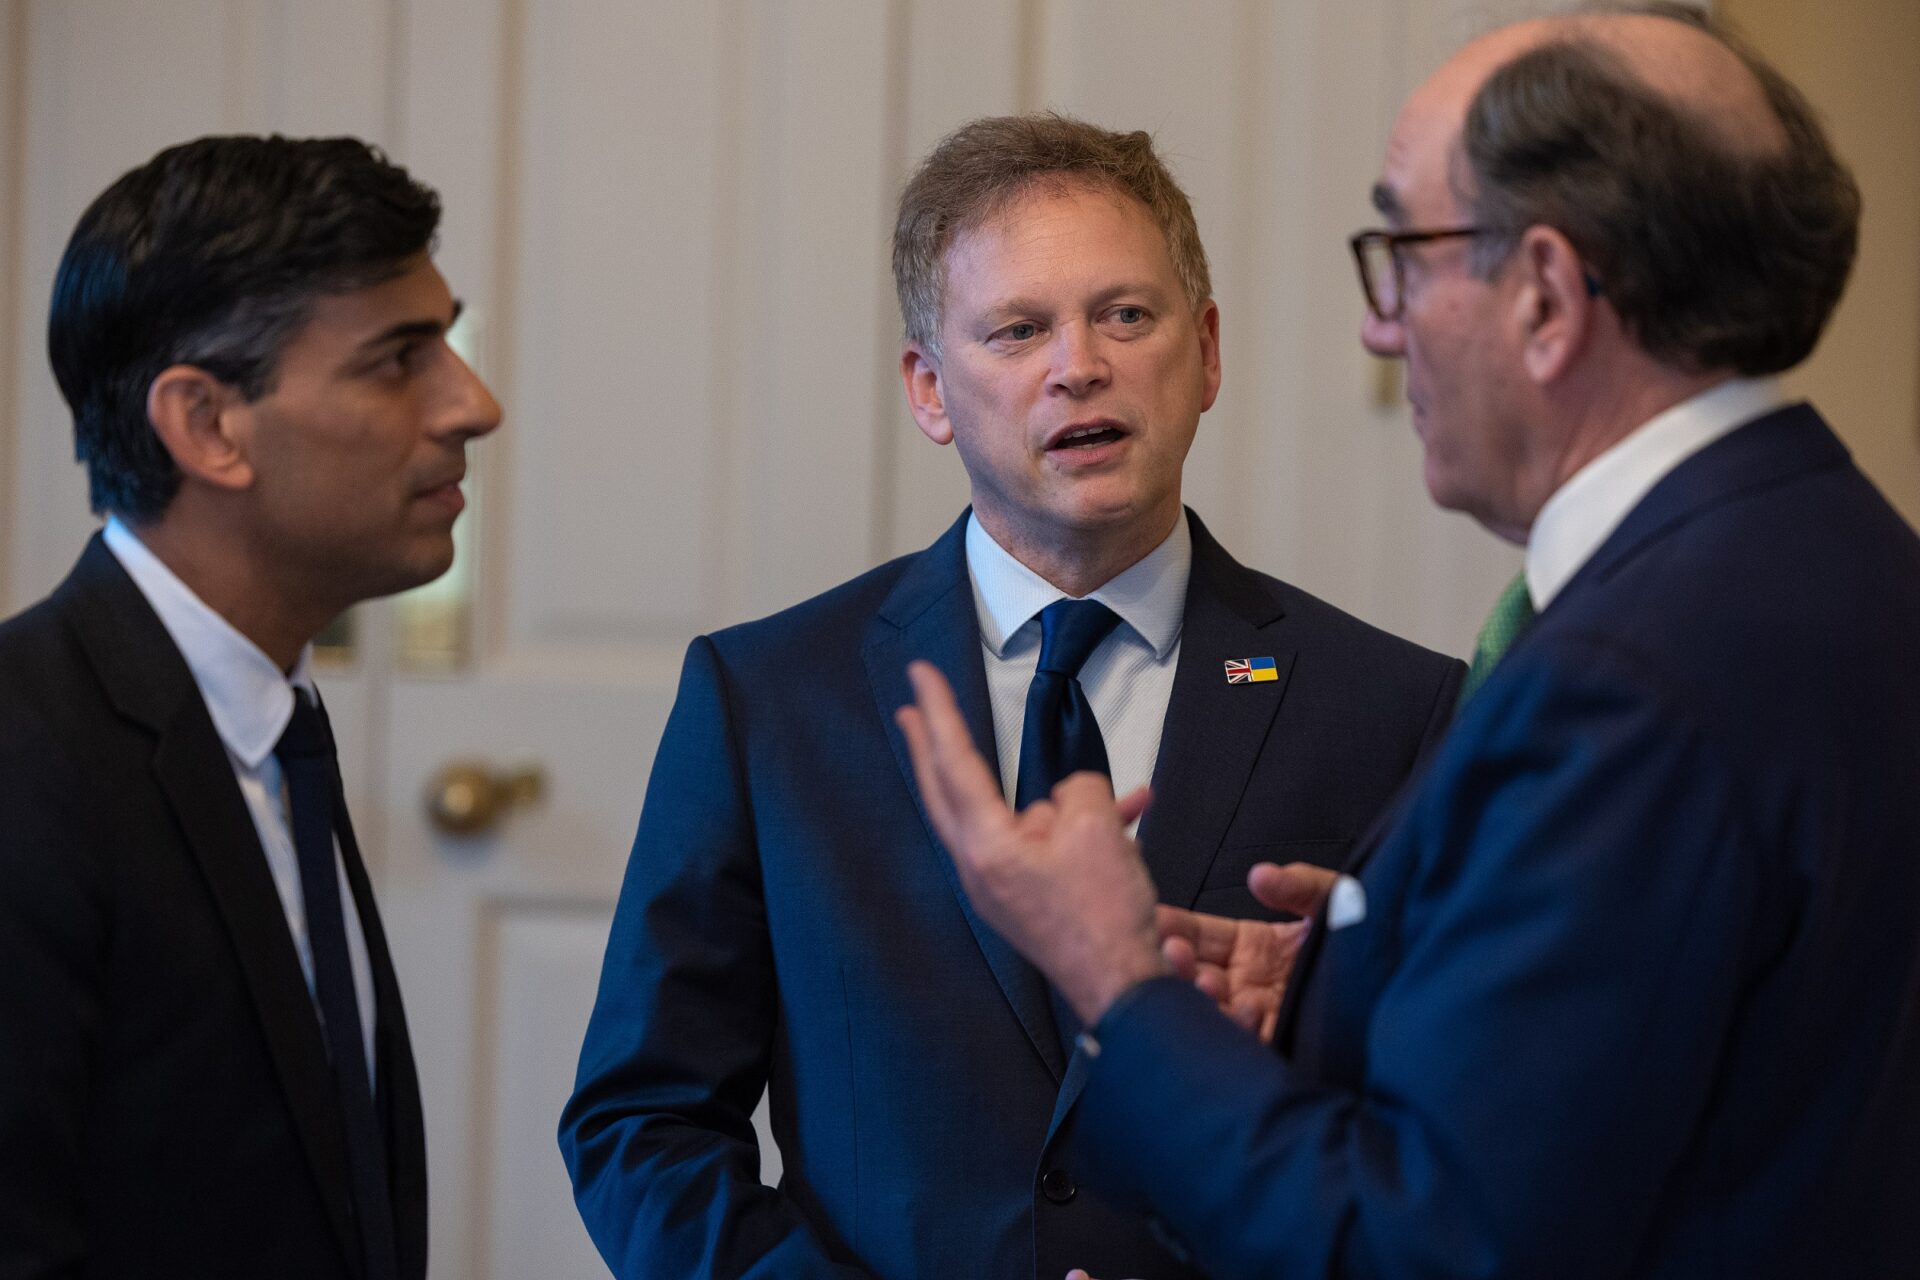 29/03/2023. London, United Kingdom. The Prime Minister Rishi Sunak, along with the Secretary of State for the Department for Energy Security and Net Zero Grant Shapps, meets Iberdrola Executive Chairman Ignacio Galan in 10 Downing Street. Picture by Simon Walker / No 10 Downing Street